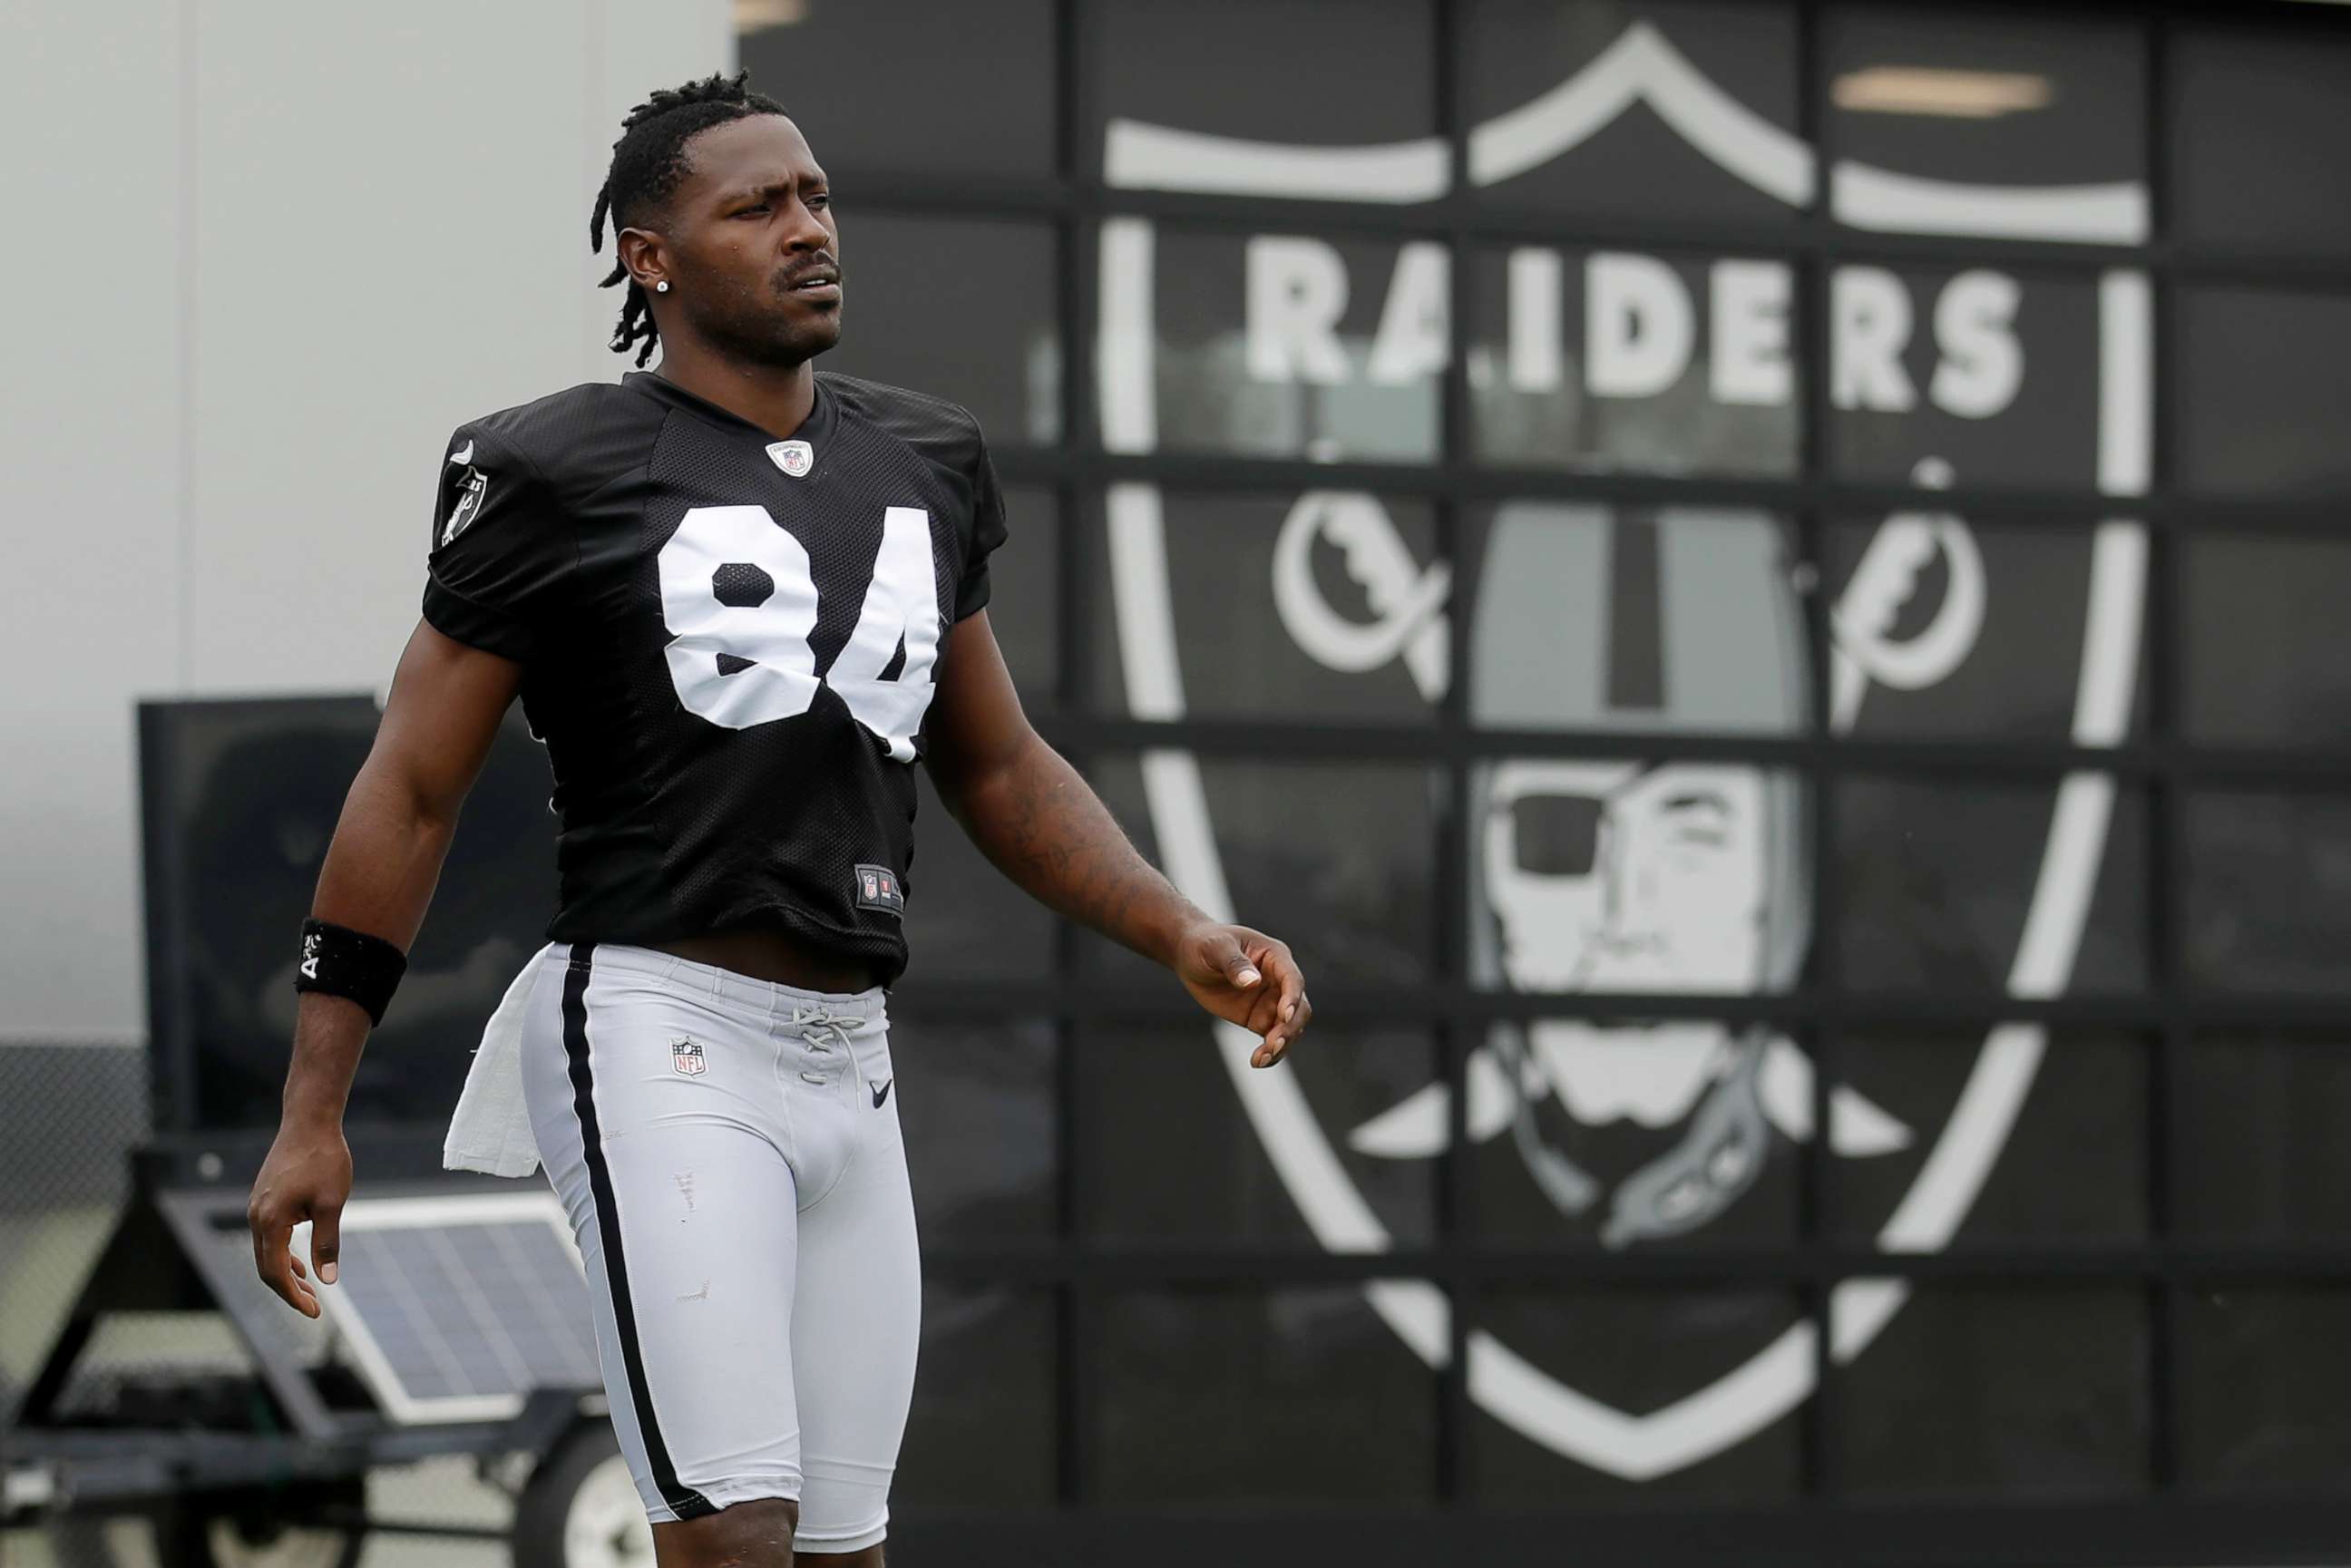 PHOTO: Oakland Raiders' Antonio Brown walks on the field while stretching during NFL football practice in Alameda, Calif., Aug. 20, 2019.